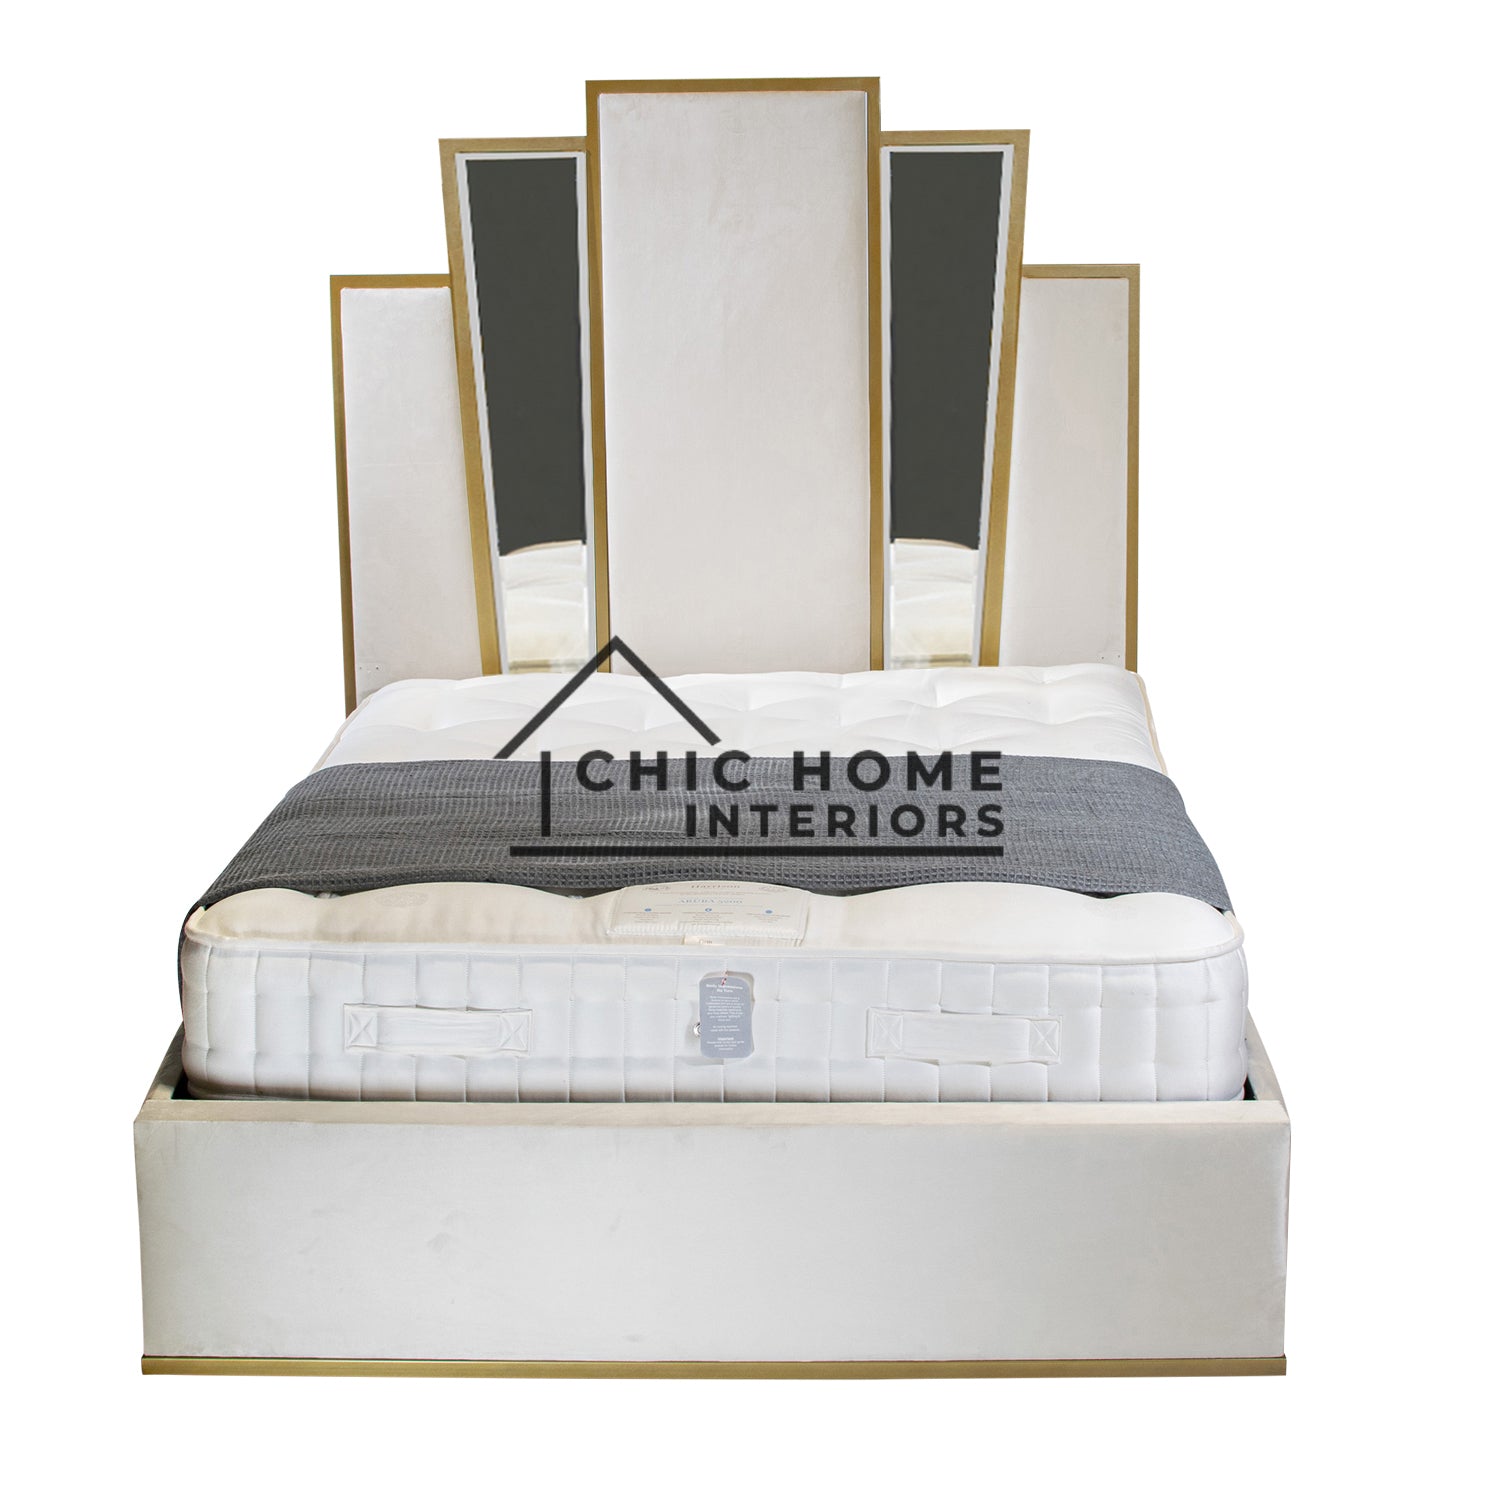 The Bespoke Mary-Kate Bed Gold Mirrored- Fully Customisable with Storage Options- Luxe Metal Range